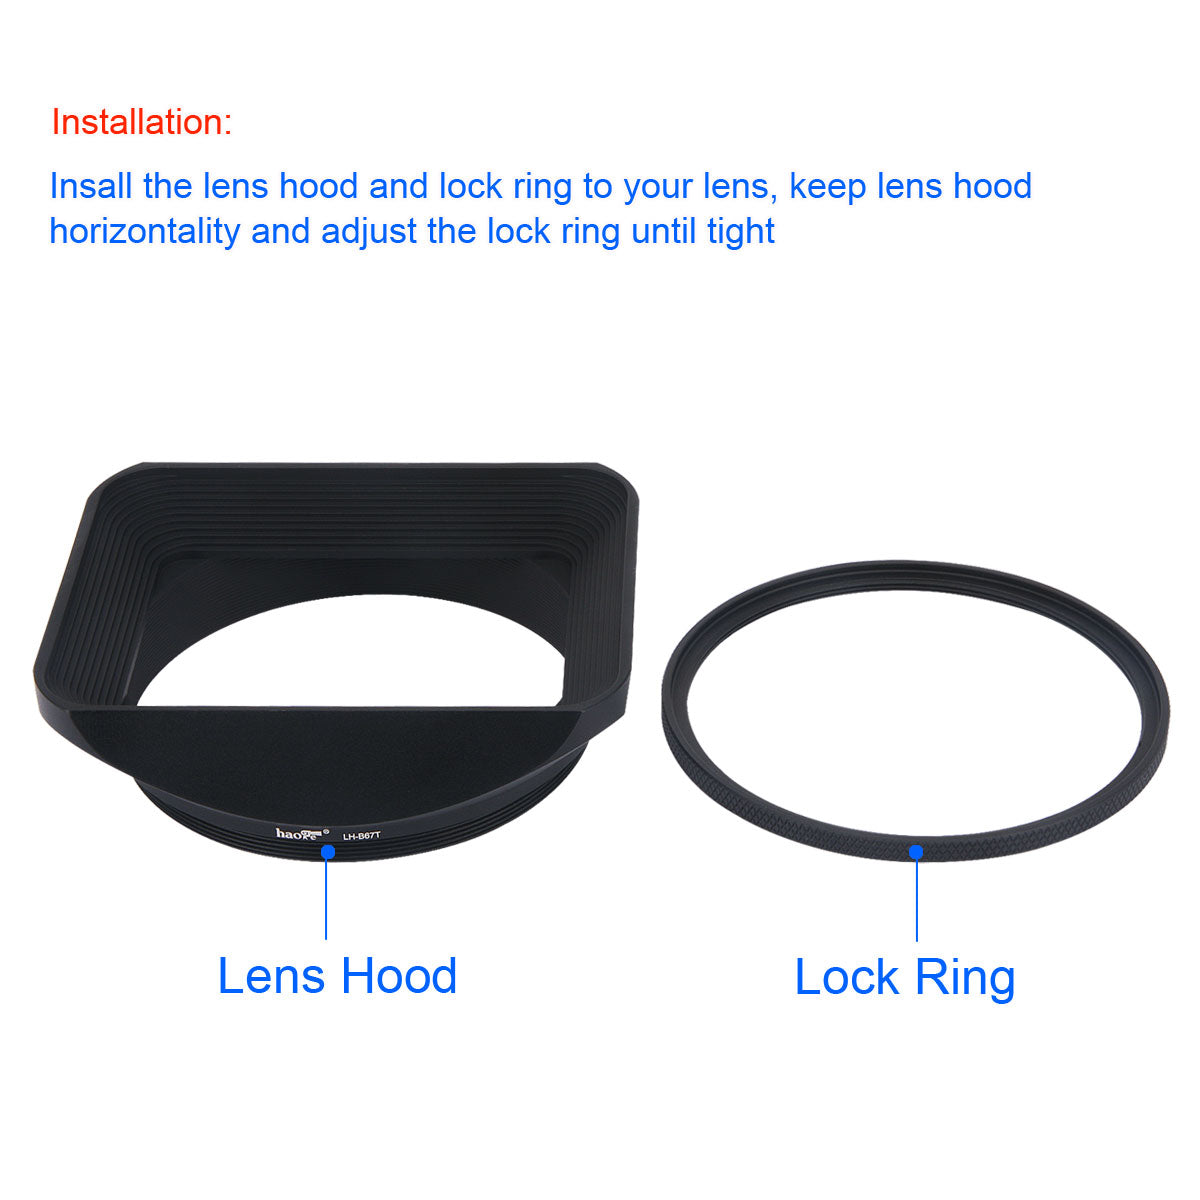 Haoge 67mm Square Metal Screw-in Mount Lens Hood Shade with Cap for 67mm Canon Nikon Sony Leica Leitz Carl Zeiss Voigtlander Nikkor Panasonic Fujifilm Olympus Lens and Other 67mm Filter Thread Lens